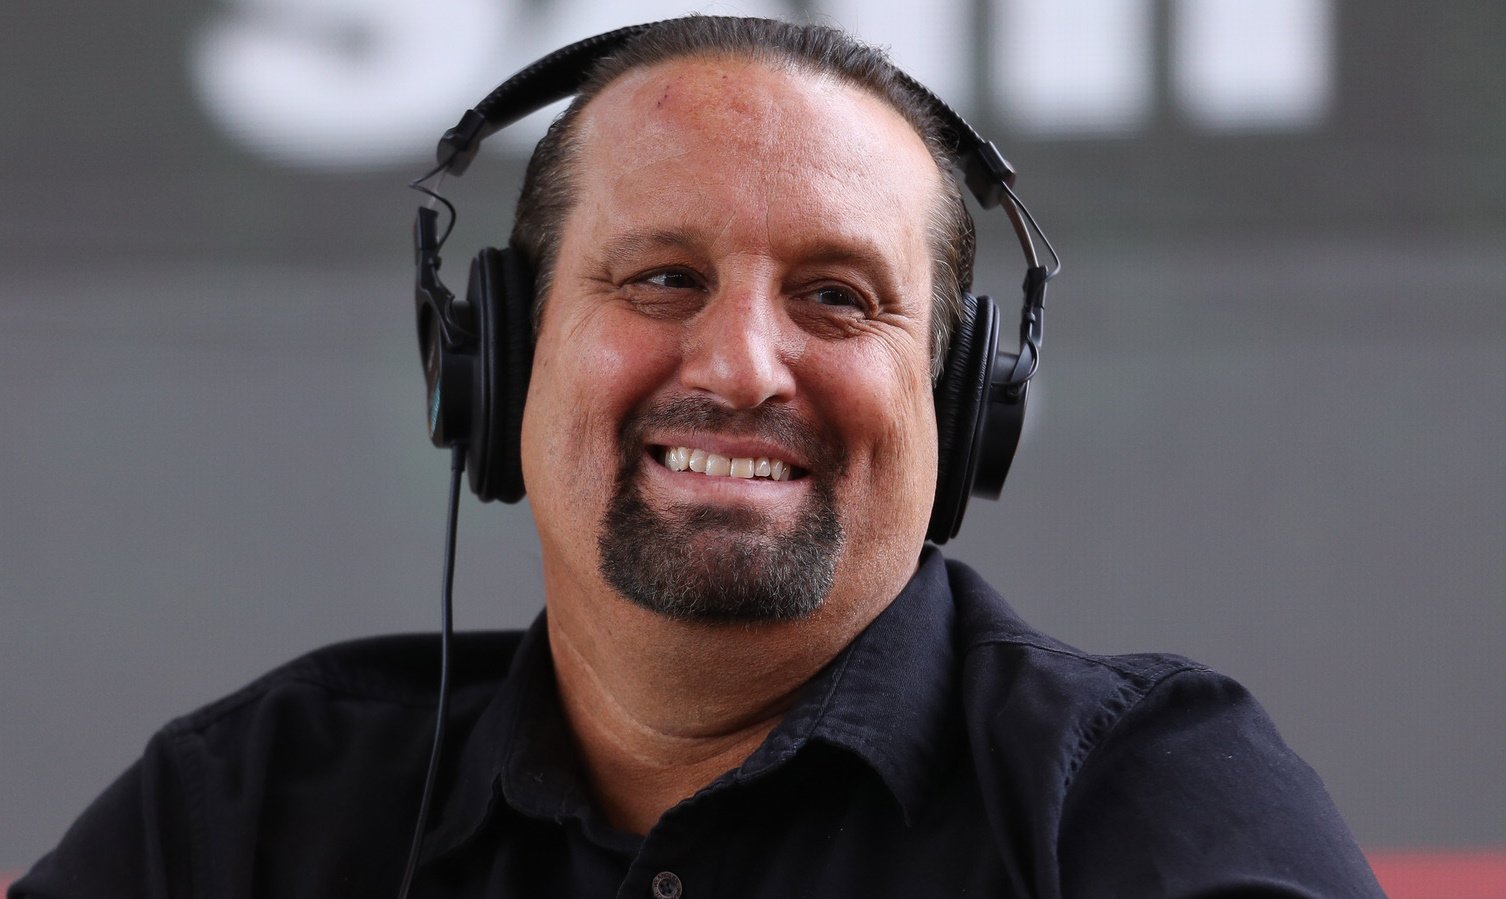 “Tommy Dreamer Shares His Thoughts on Tony Khan’s Impactful Appearance on AEW Dynamite”